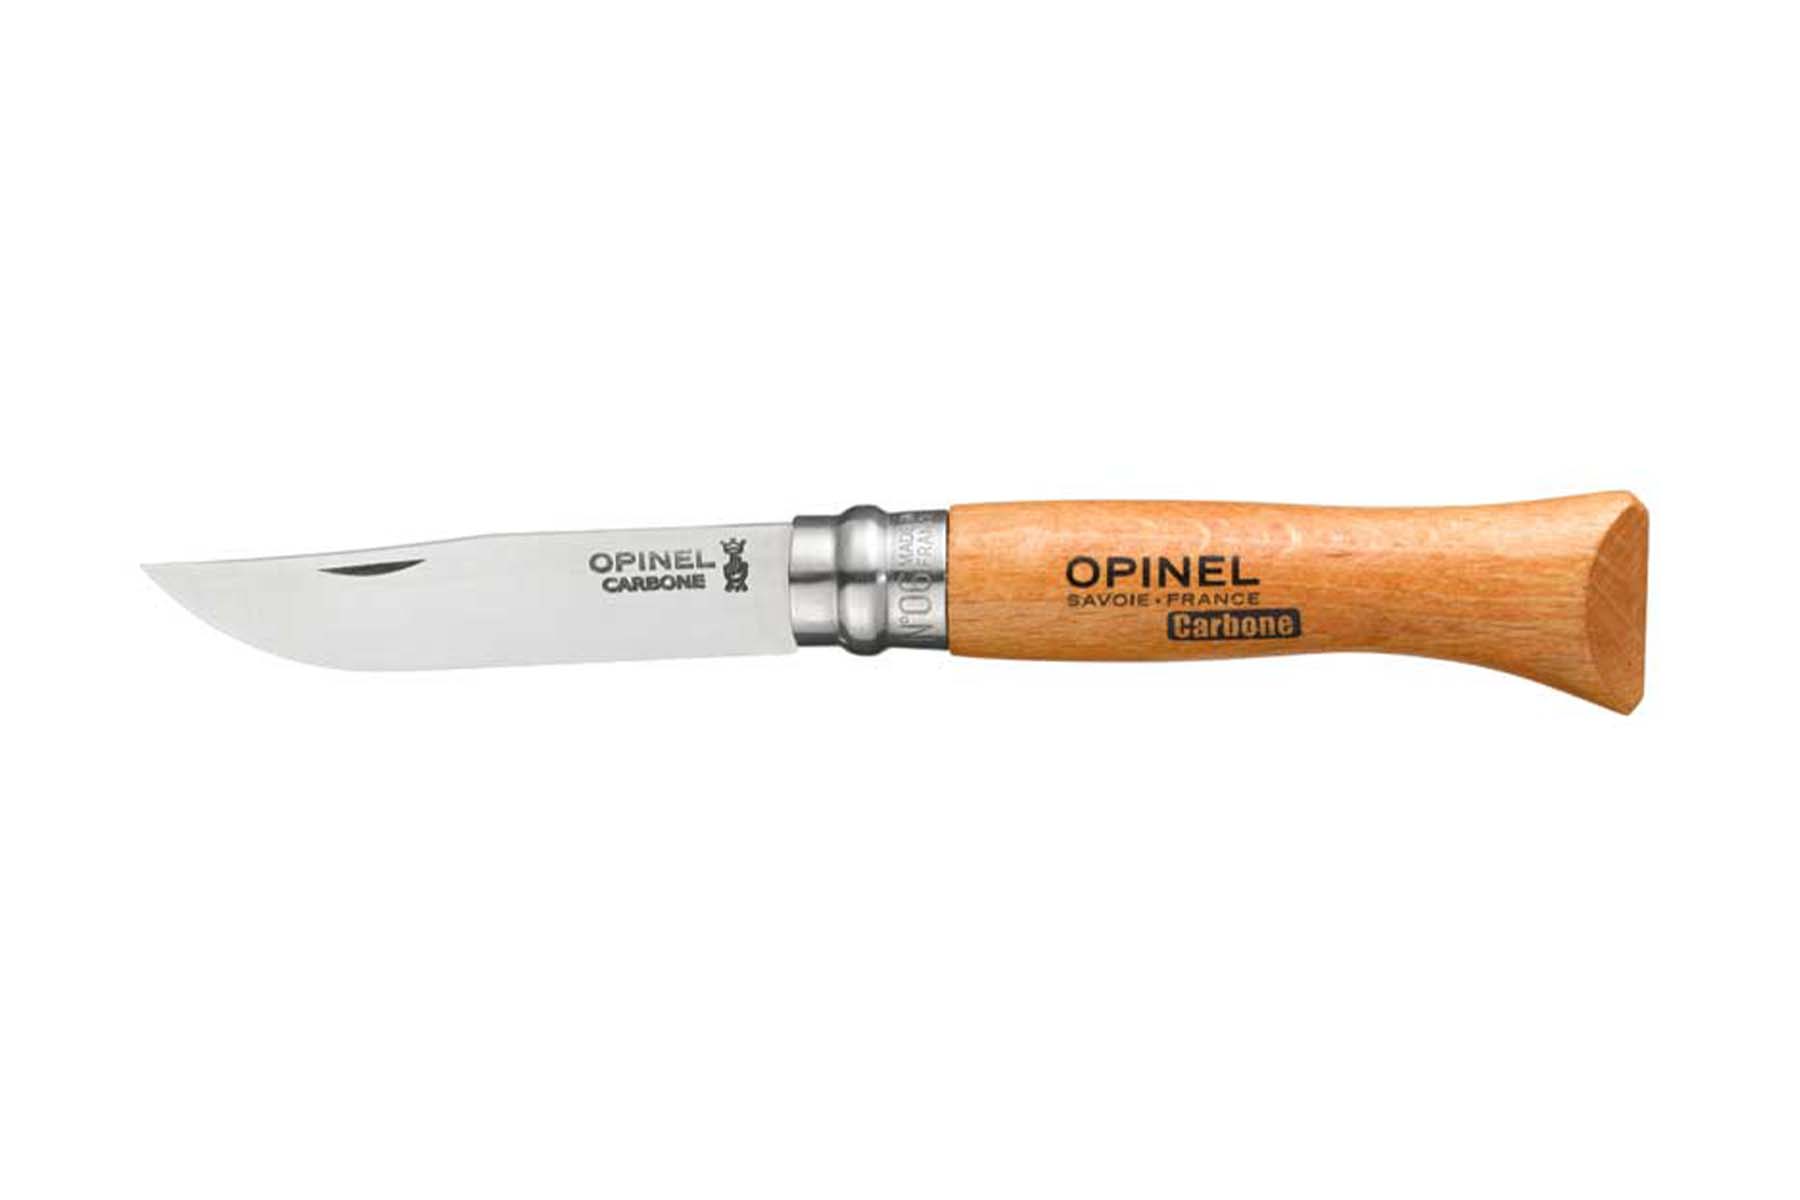 Couteau Opinel n°06 lame carbone